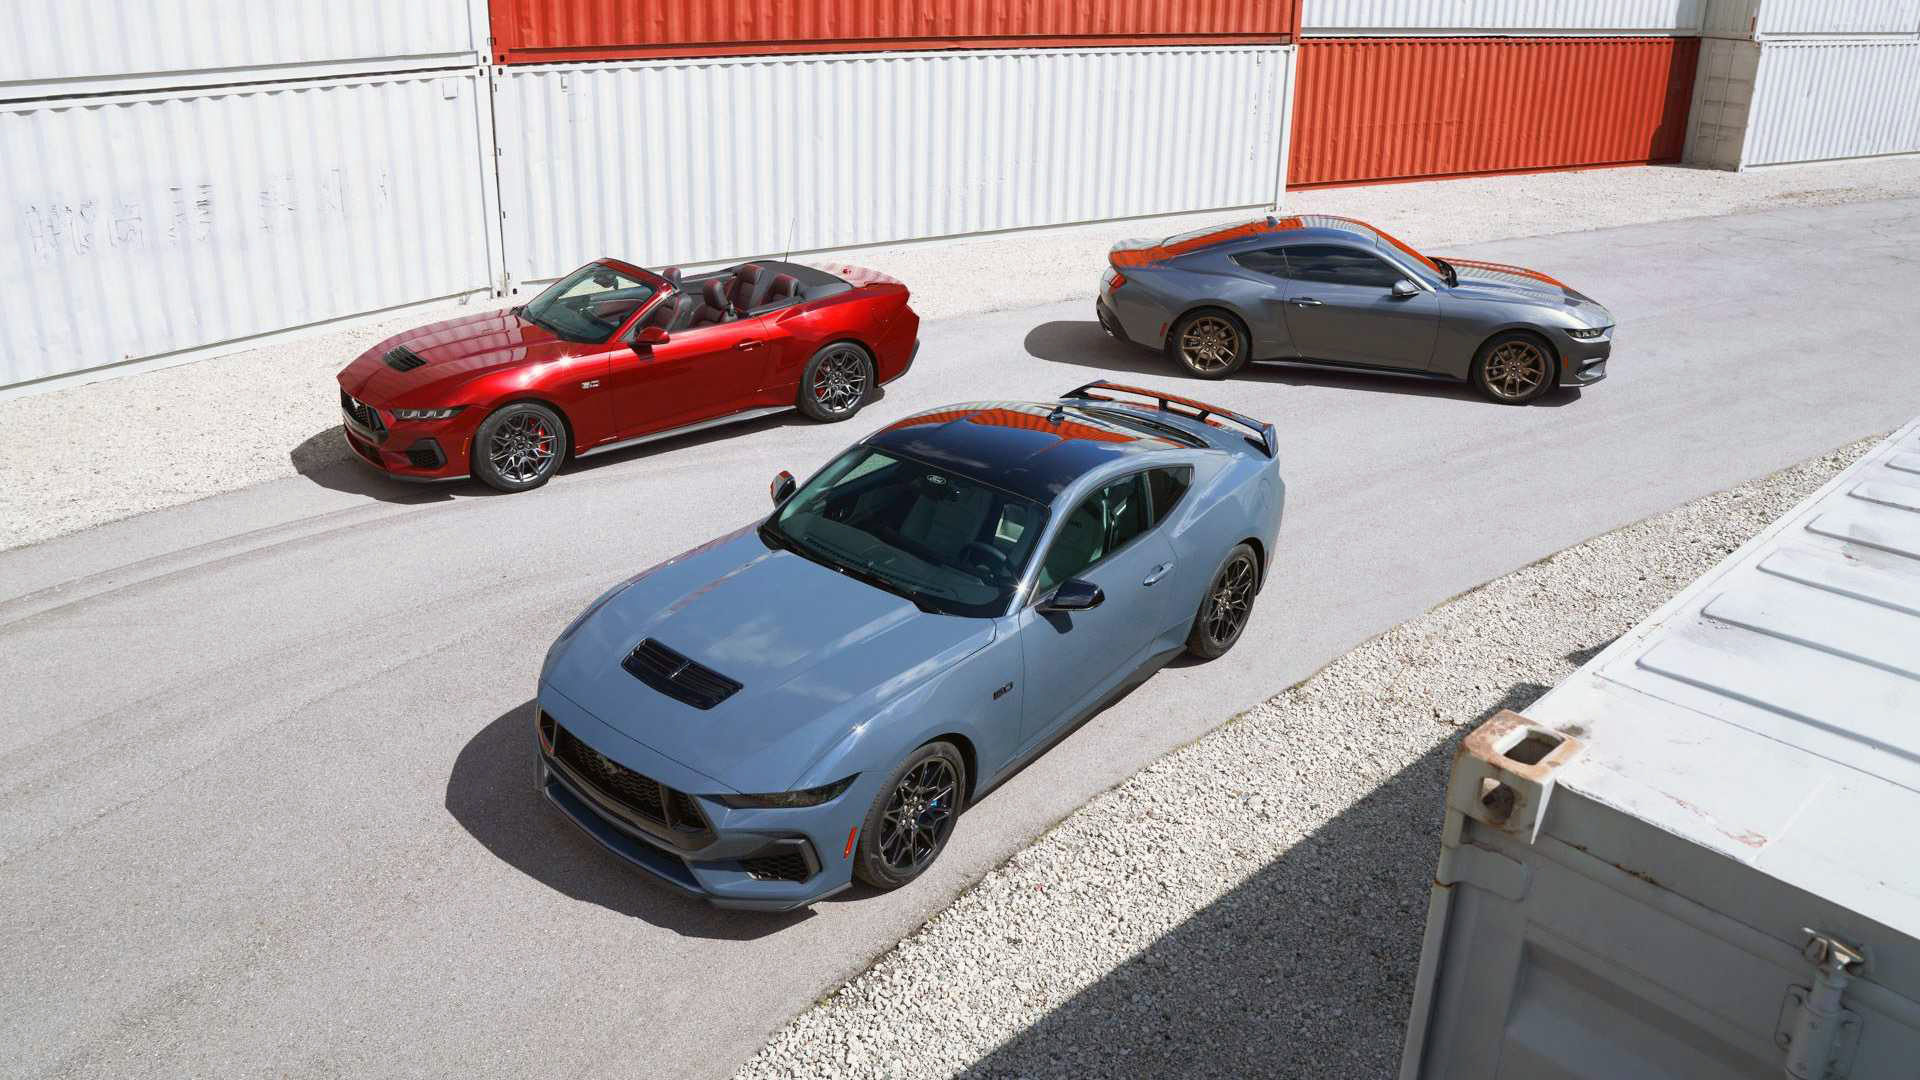 Three copies of the new Mustang.  The 5-liter Coyote V8 and EcoBoost 4-cylinder convertible engine form the basis of the seventh generation